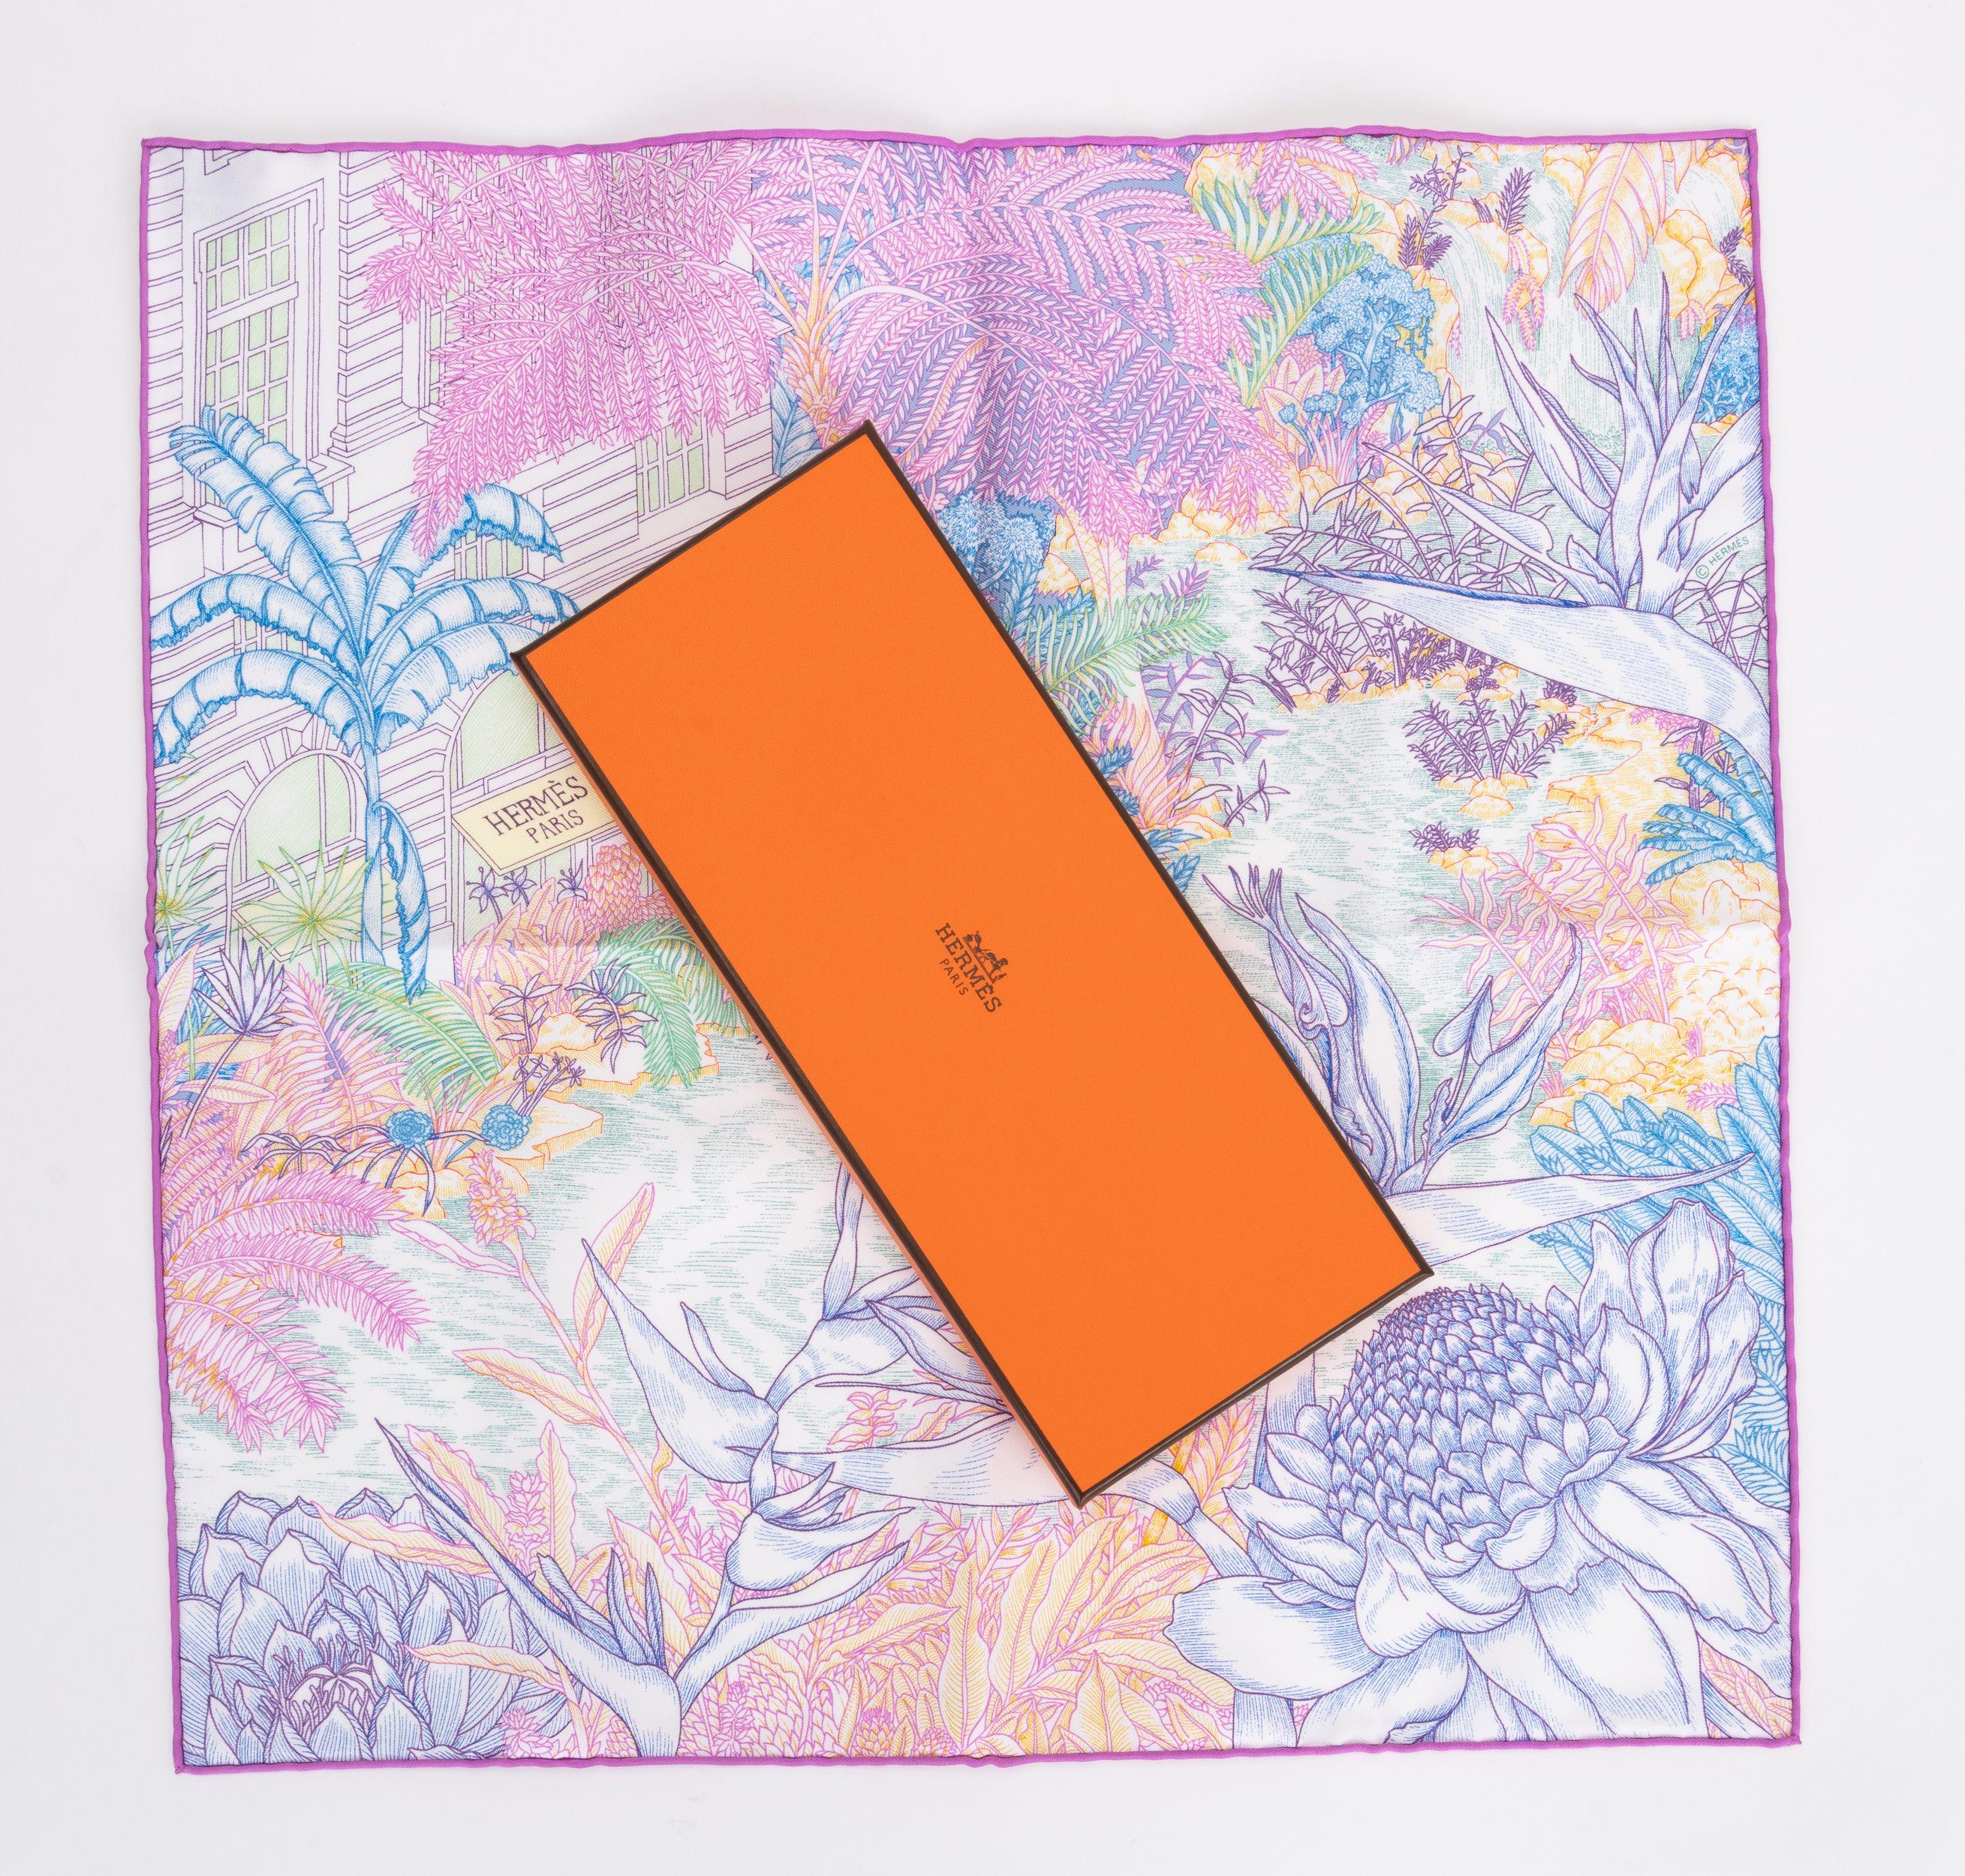 Hermès brand new in box tropical garden pastels silk gavroche. Hand-rolled edges. Comes with original box.